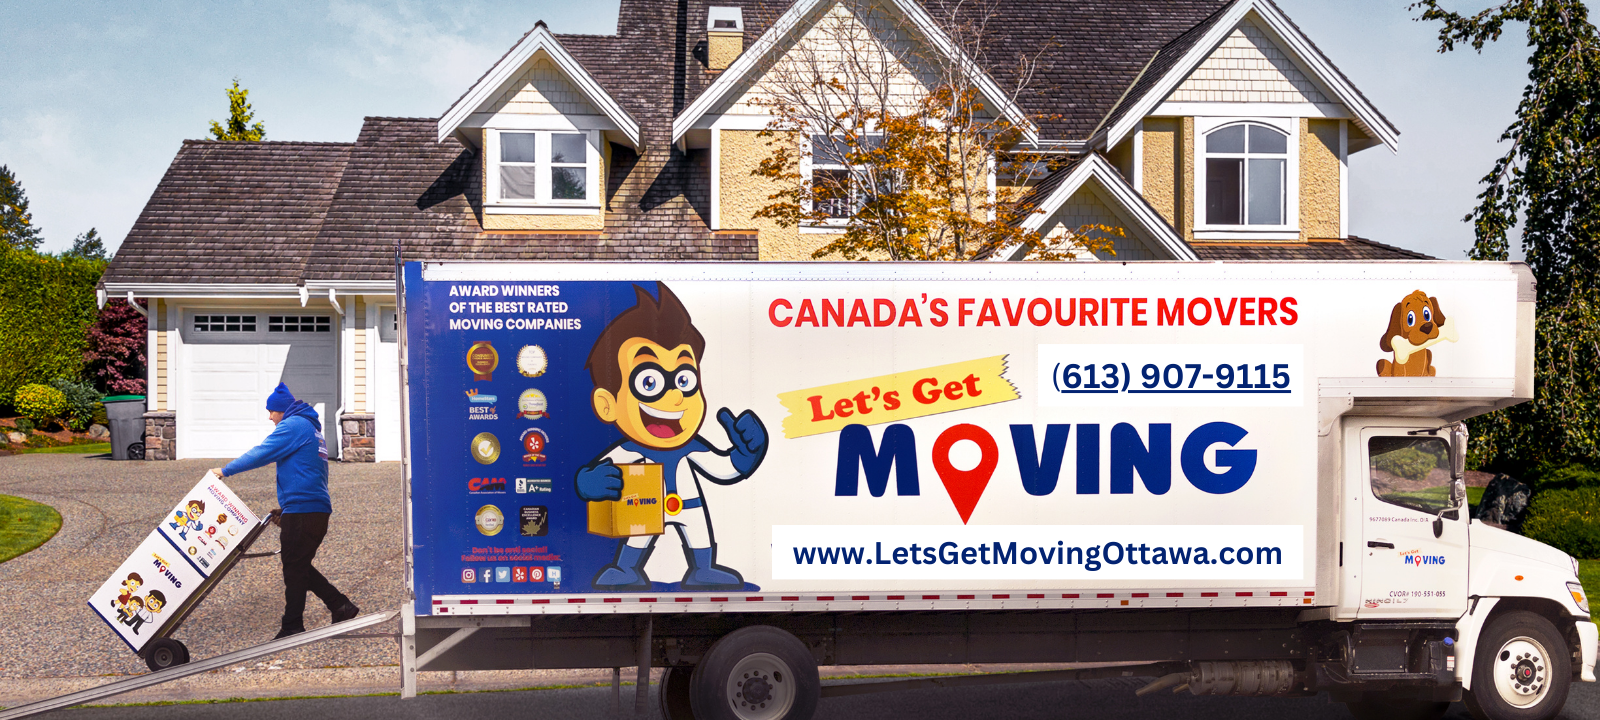 Let's Get Moving - Ottawa Movers